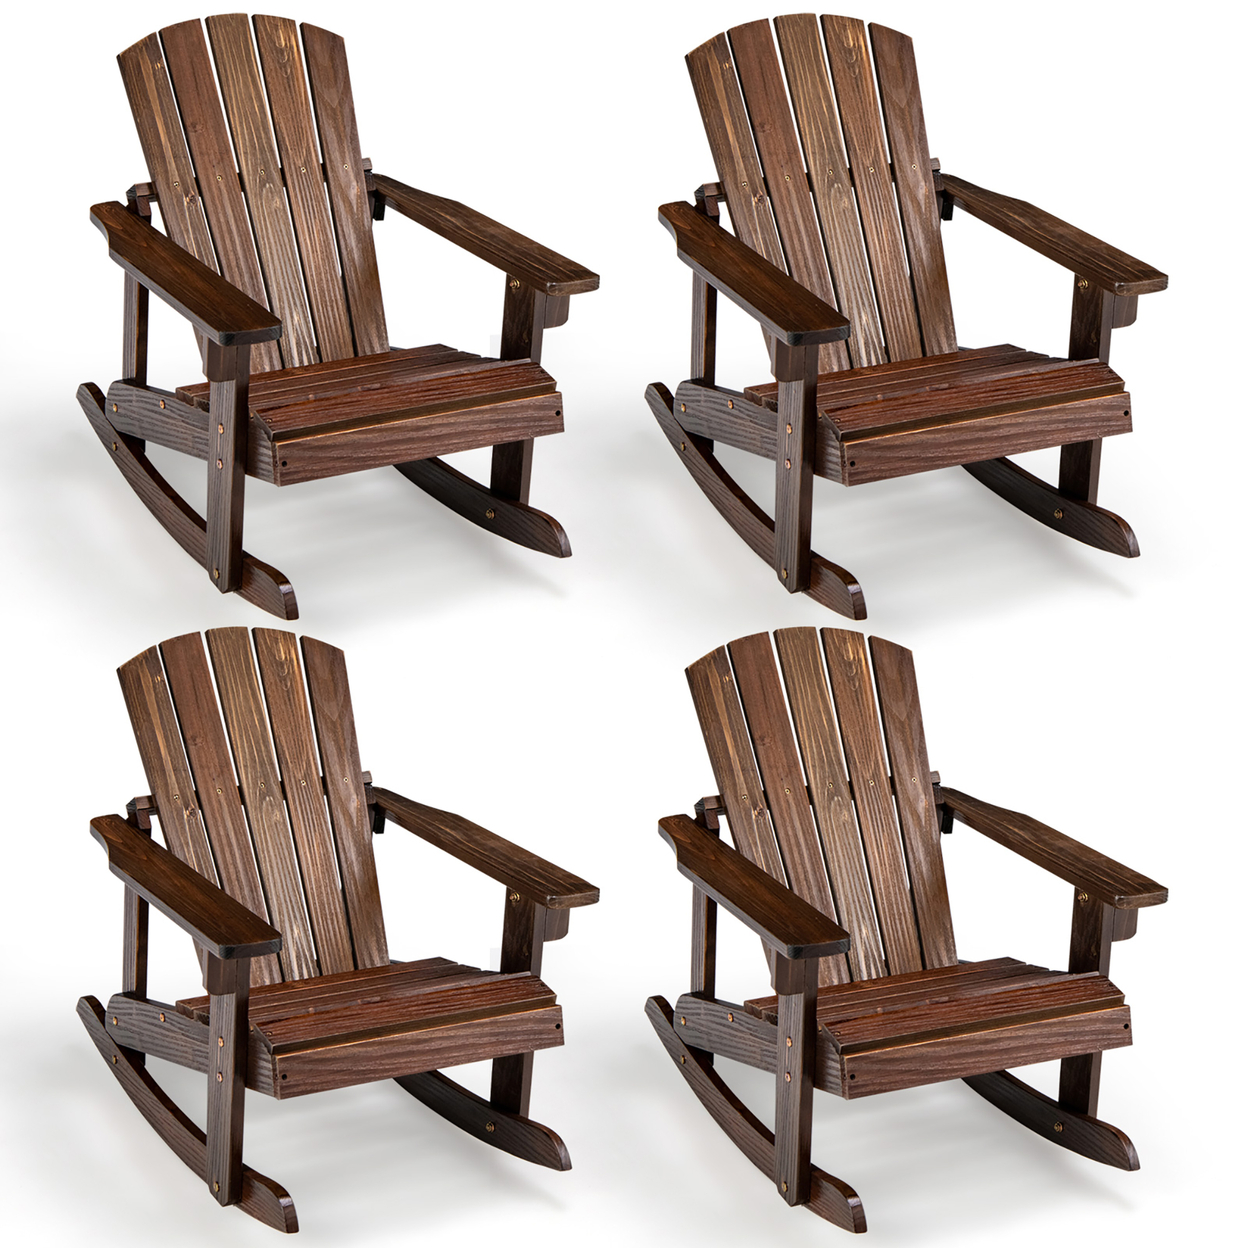 4PCS Kid Adirondack Rocking Chair Outdoor Solid Wood Slatted Seat Backrest - Coffee